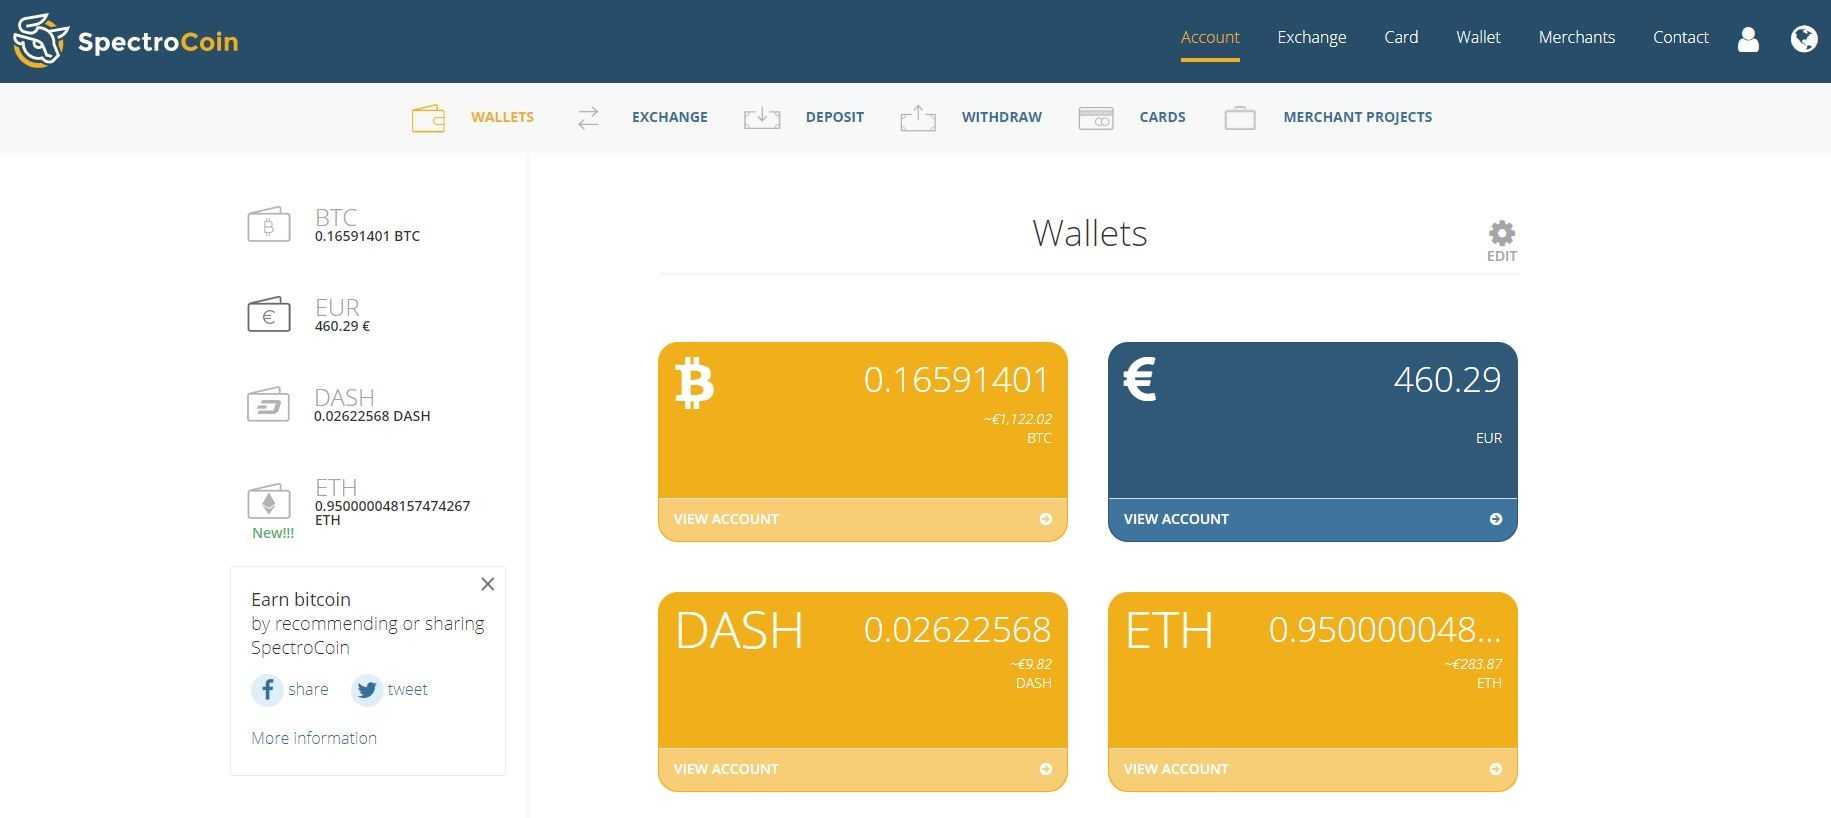 Wallets and their balances on the SpectroCoin account window